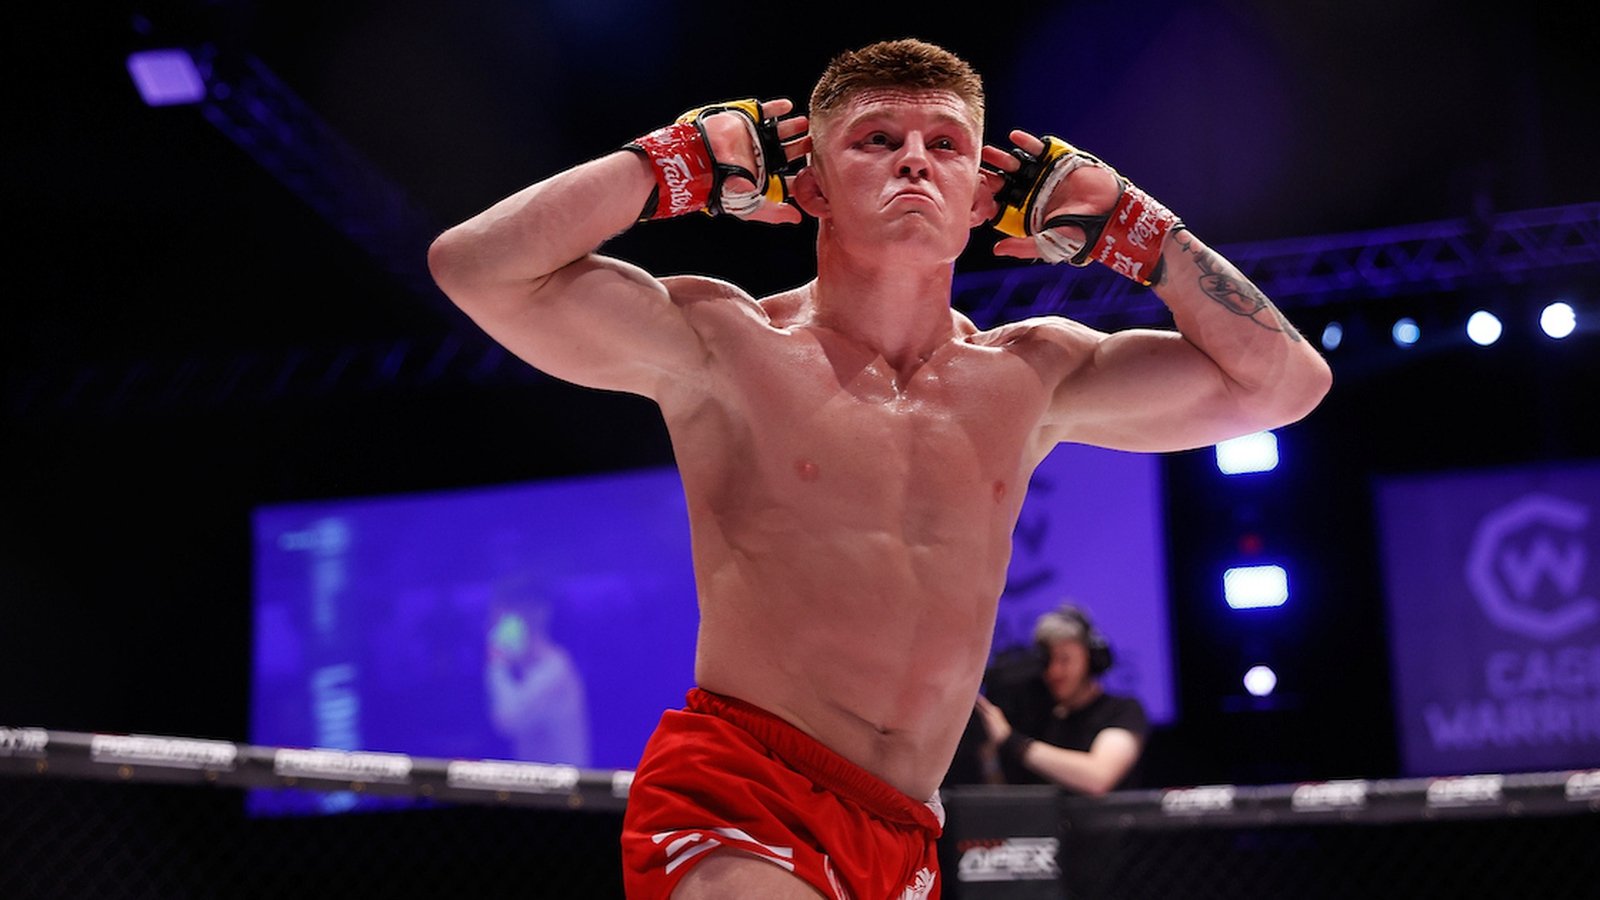 Loughran fights in Rome for Cage Warriors title